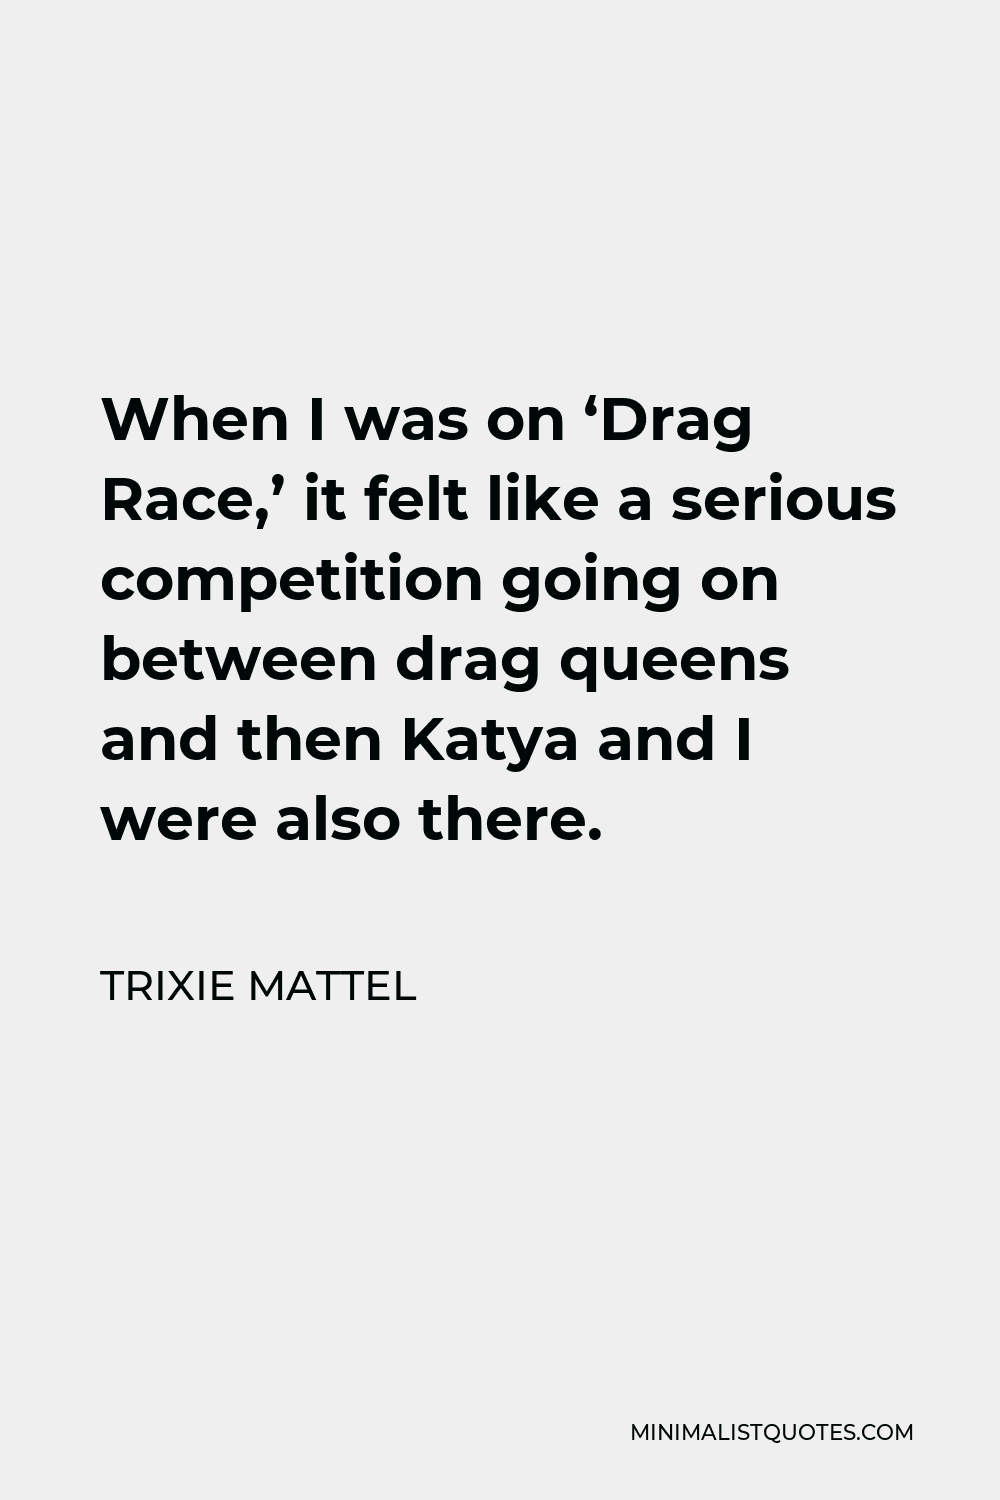 Trixie Mattel Quote - When I was on ‘Drag Race,’ it felt like a serious competition going on between drag queens and then Katya and I were also there.